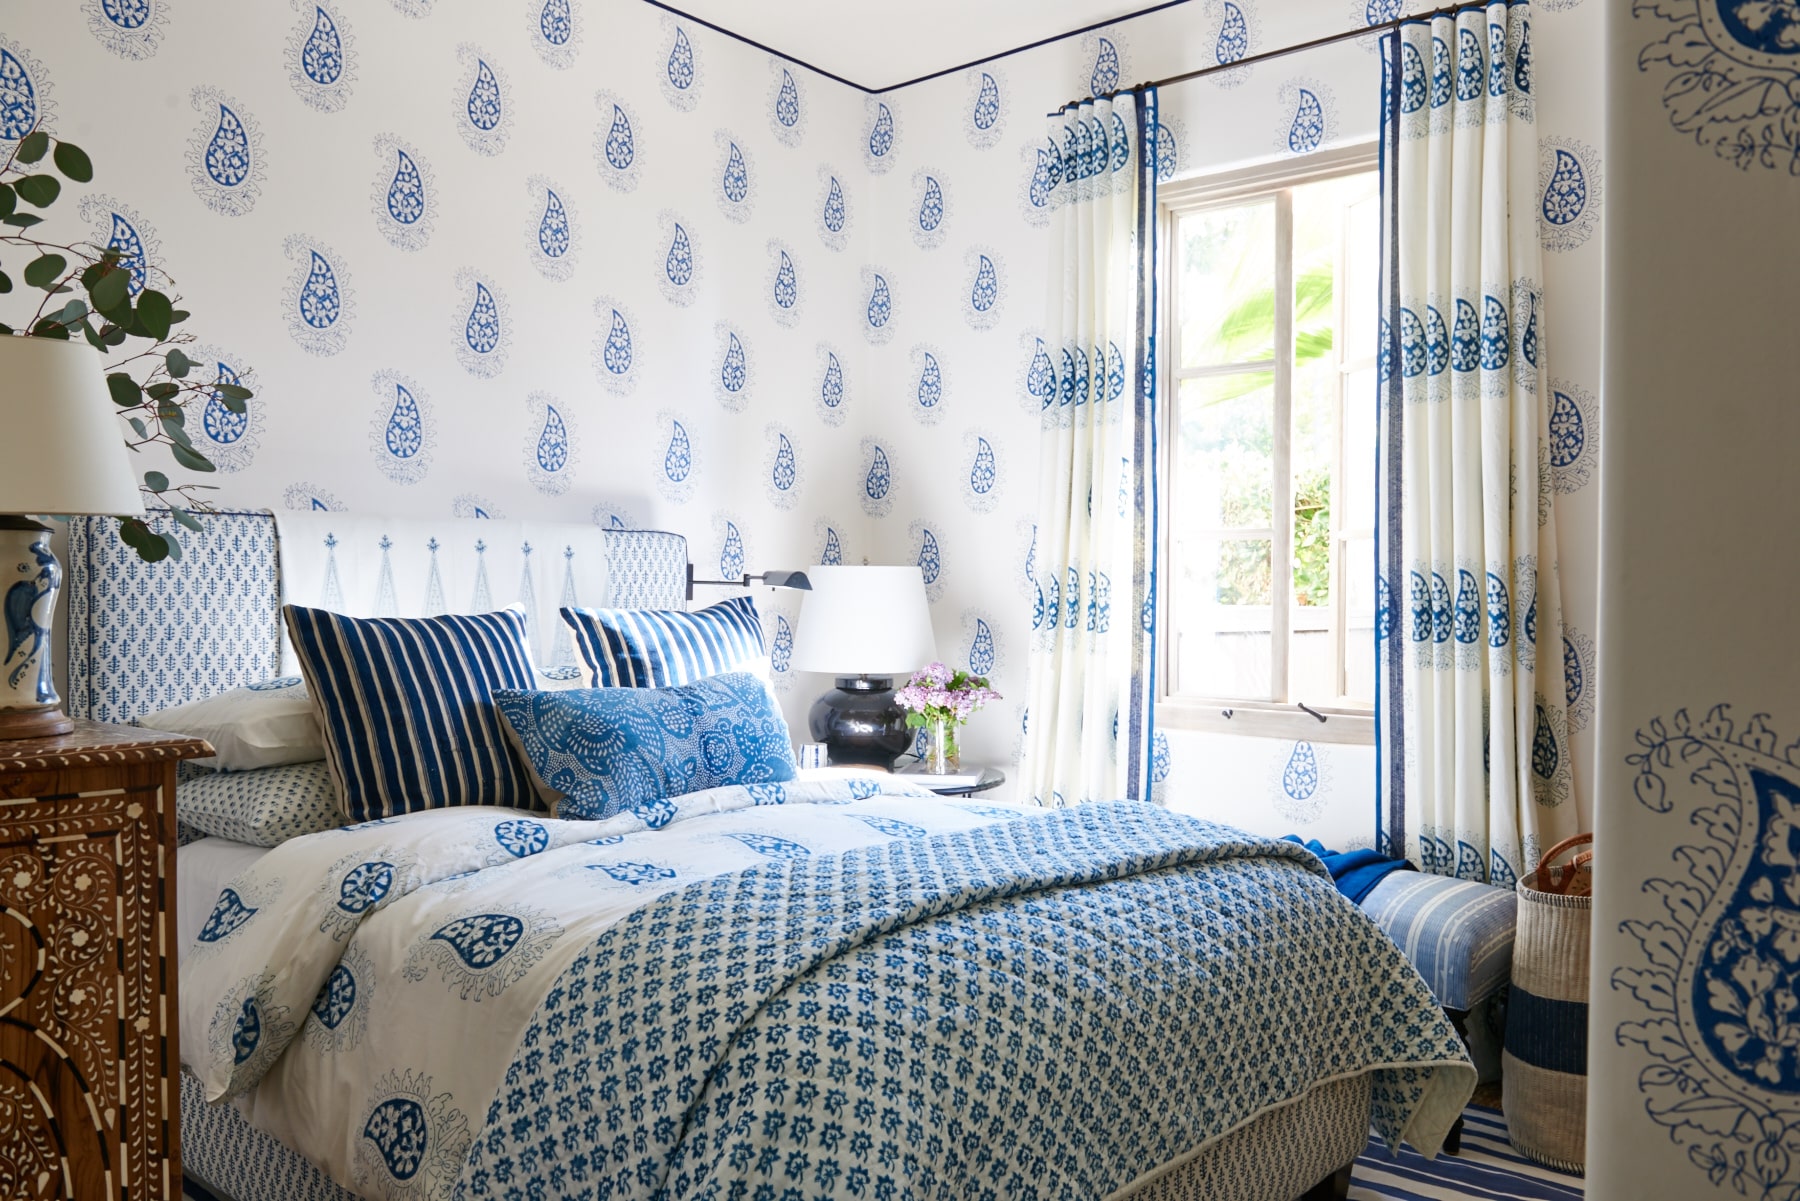 Teardrop pattern blue and white drapery with contrast lead edge, bedding, upholstered headboard, and wallpaper